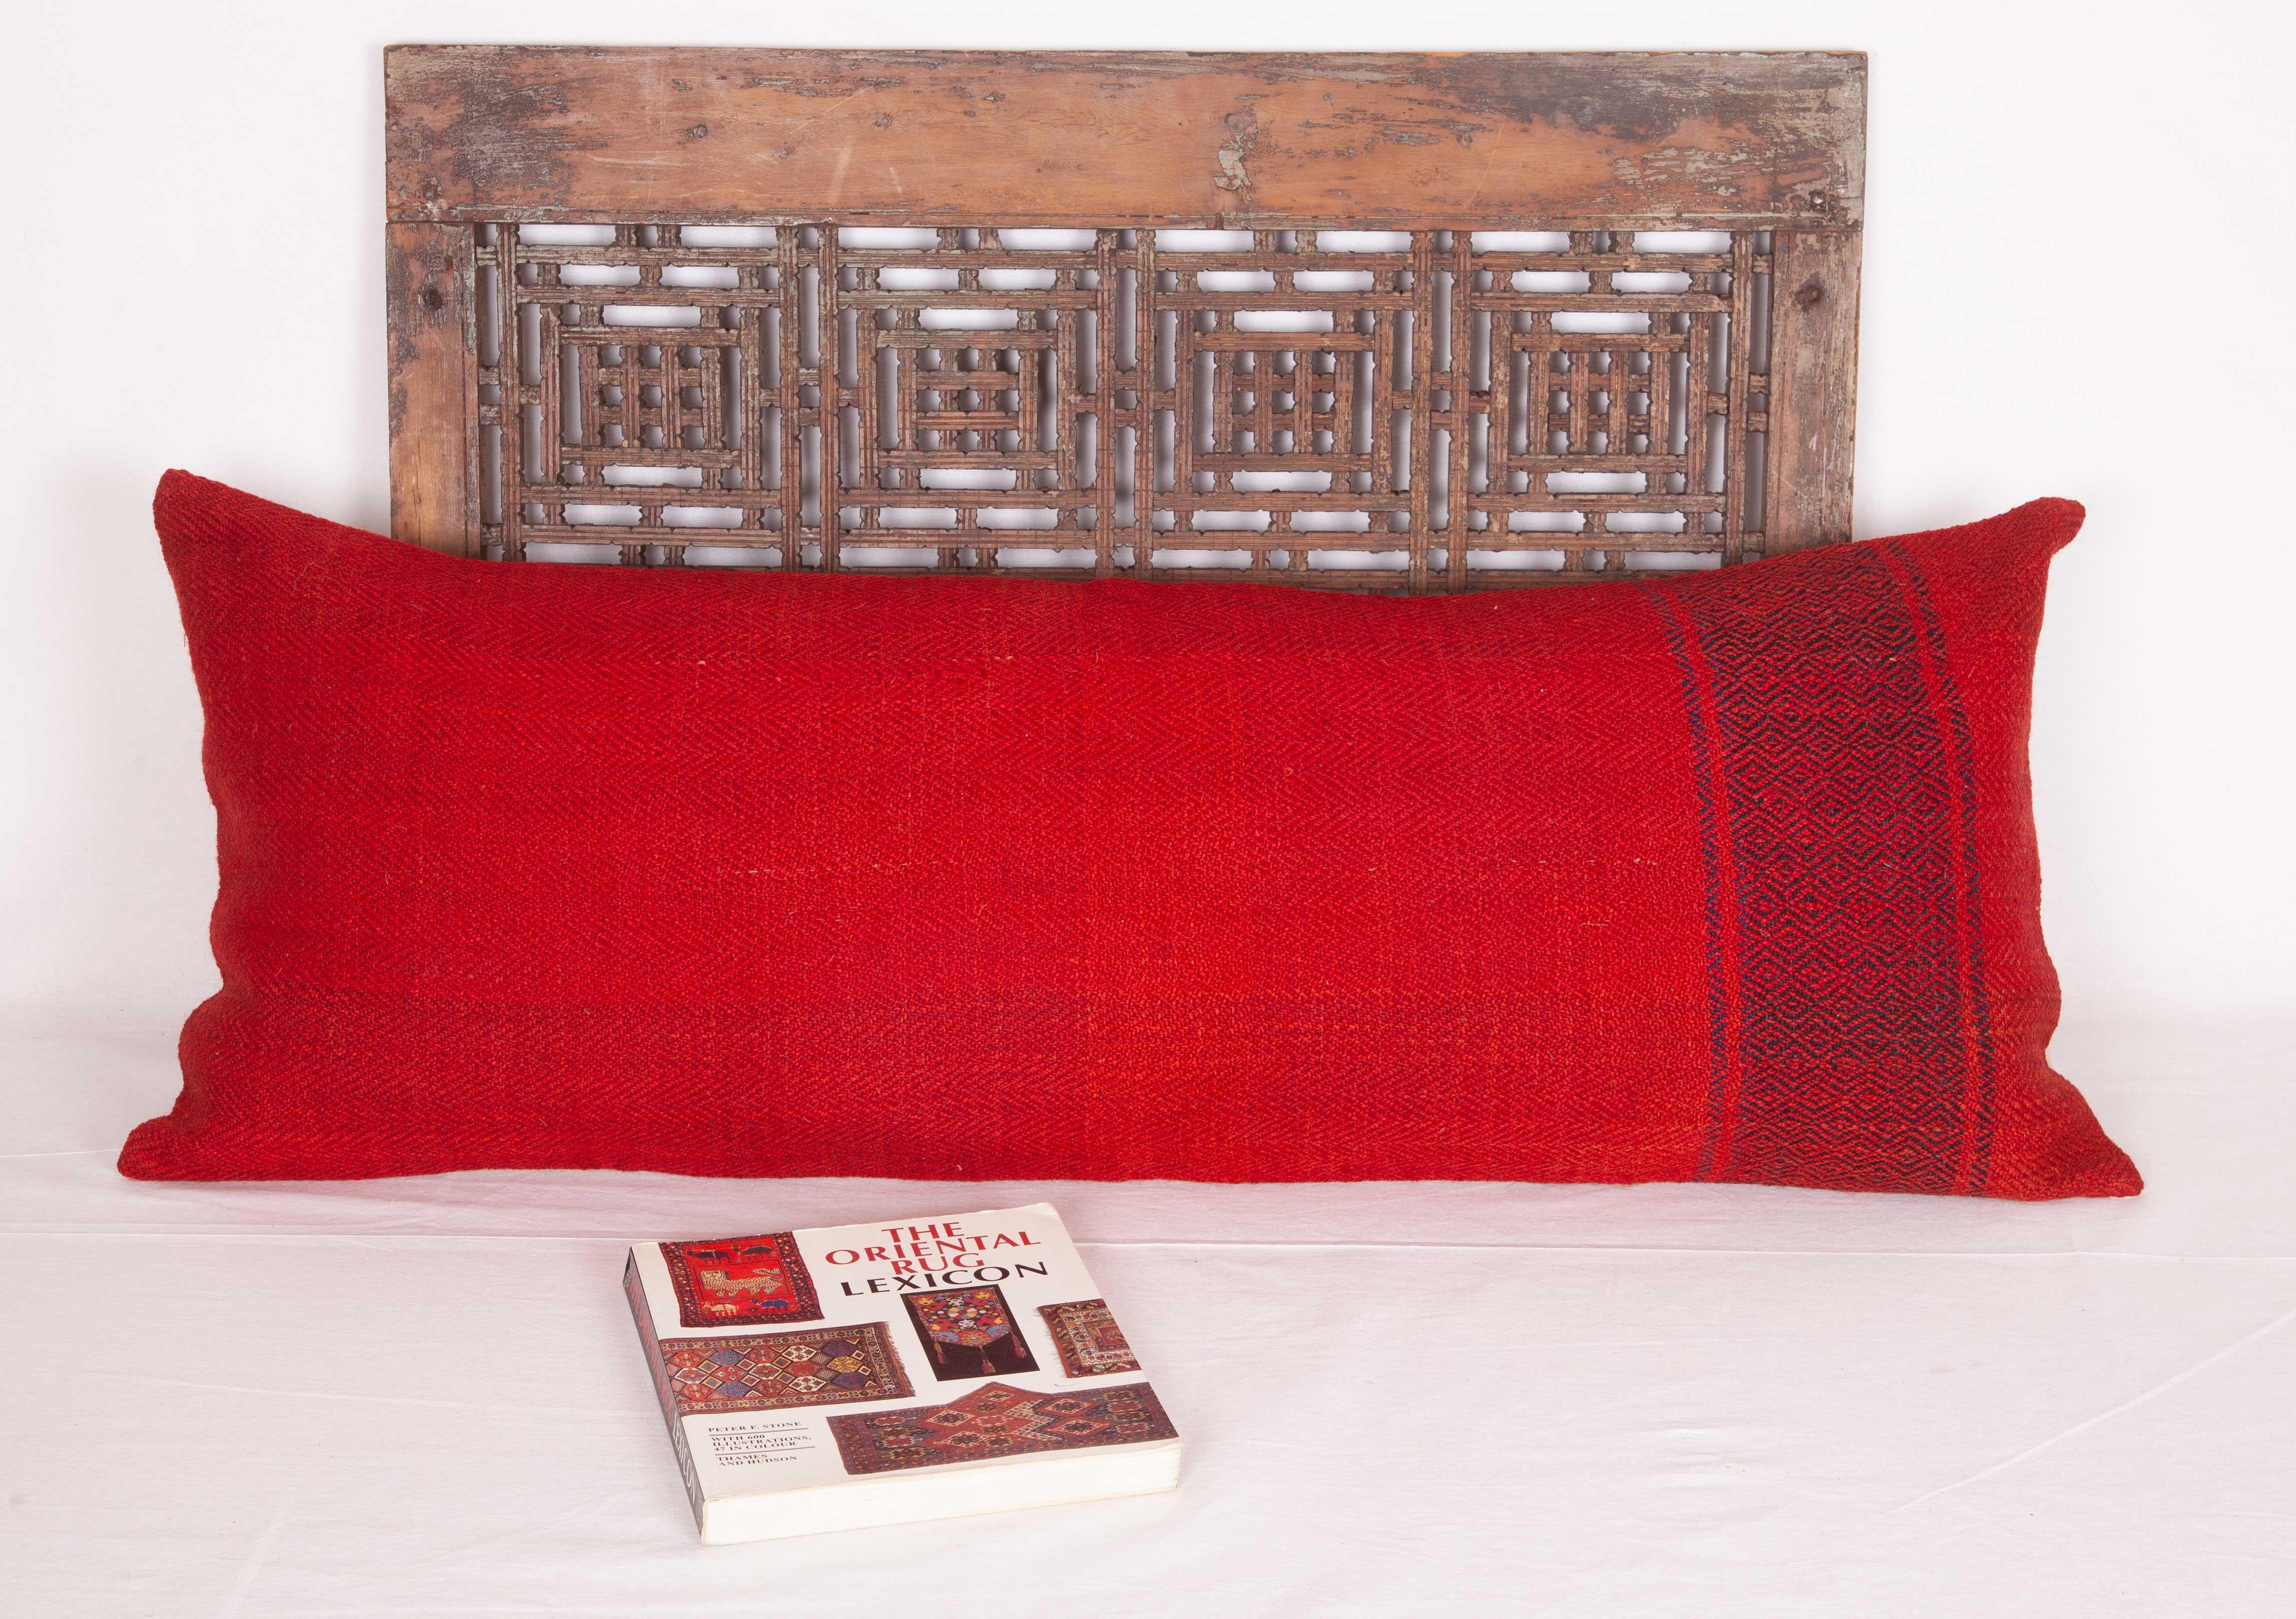 Hand-Woven Lumbar Pillow Case Fashioned from a Mid-20th Century Anatolian Cover